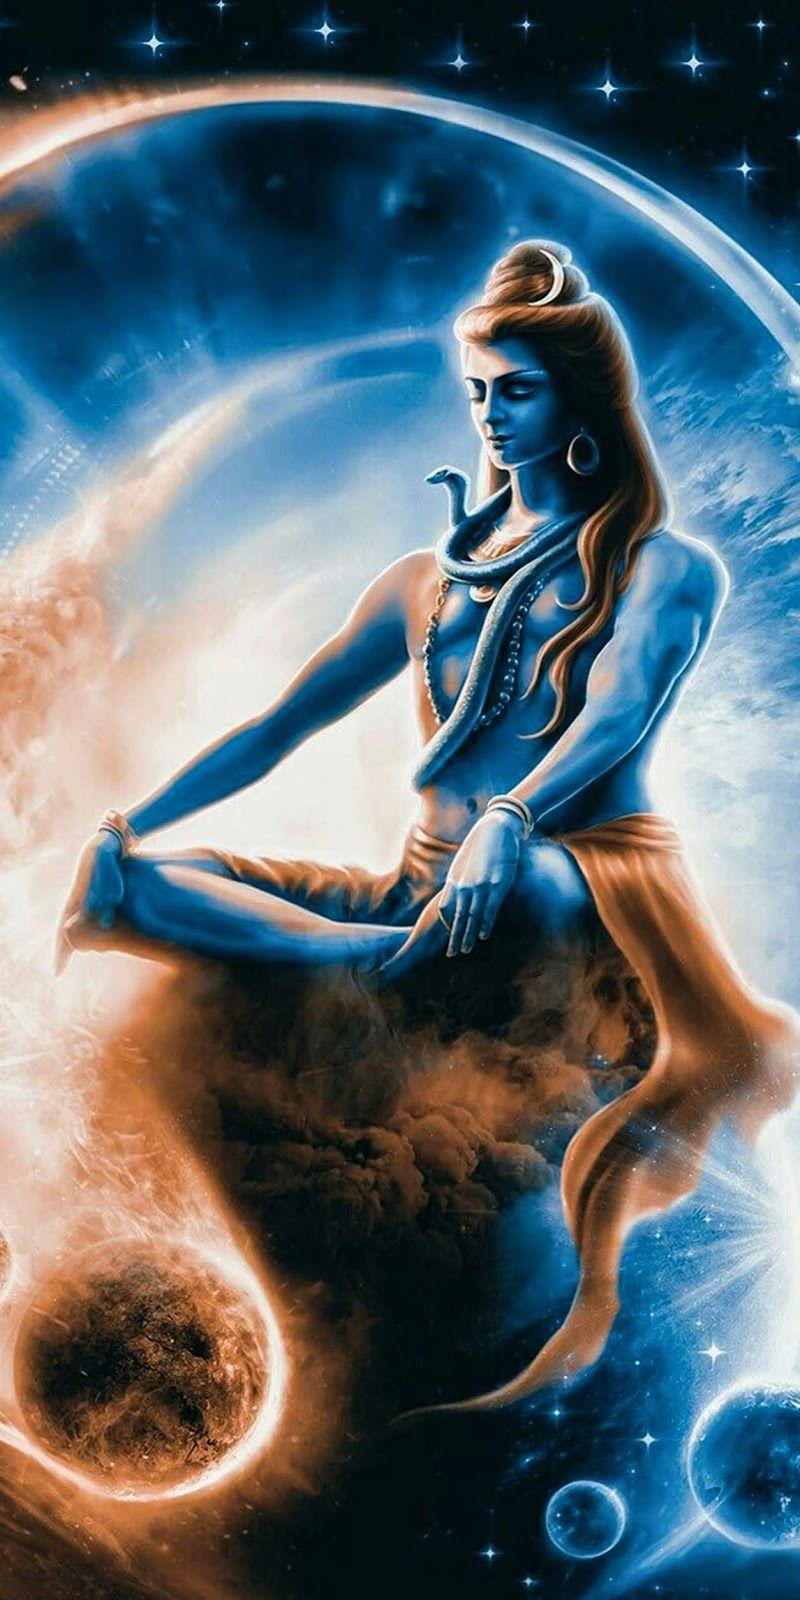 Download Lord Shiva in Tapas Wallpaper for your Android